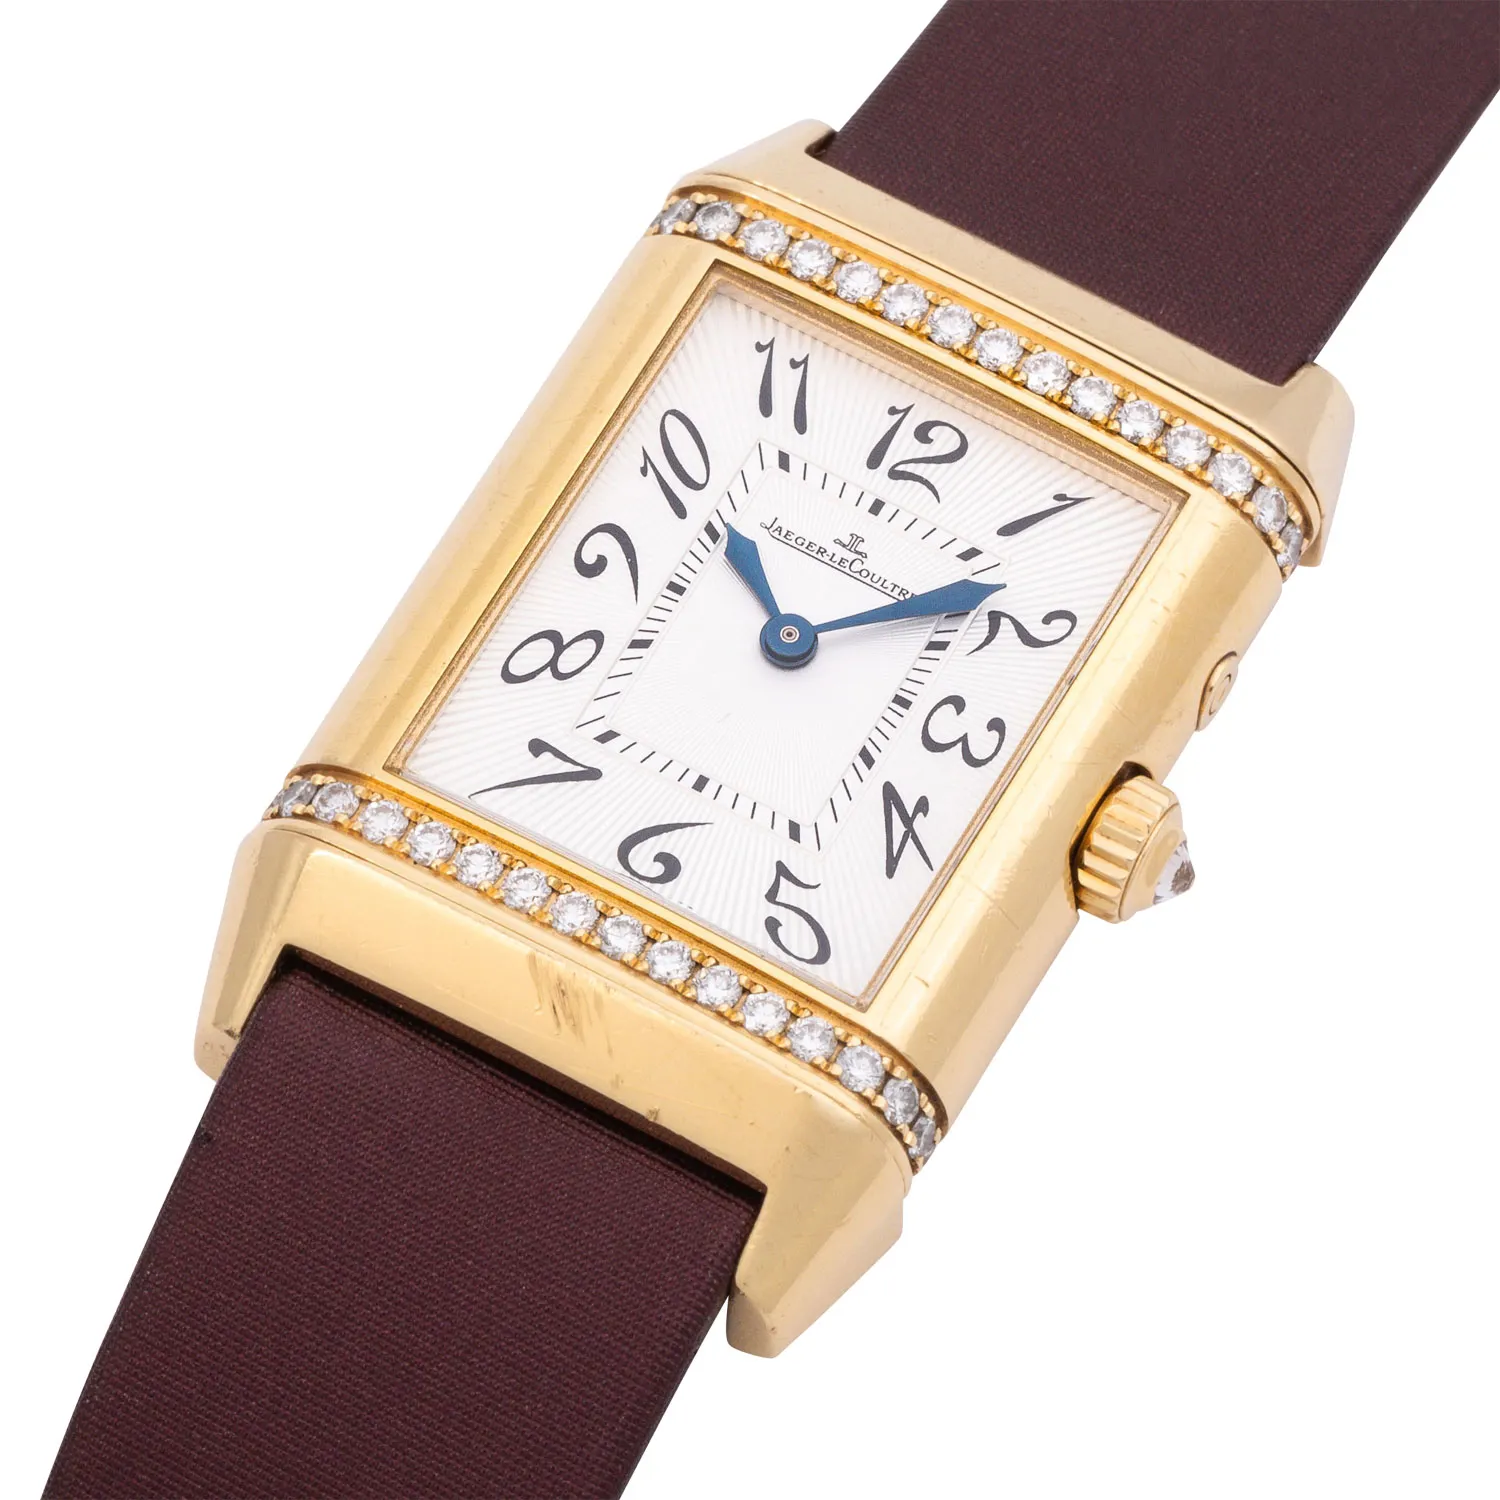 Jaeger-LeCoultre Reverso Duetto Duo 26.1.54 25mm Yellow gold and diamond-set 4